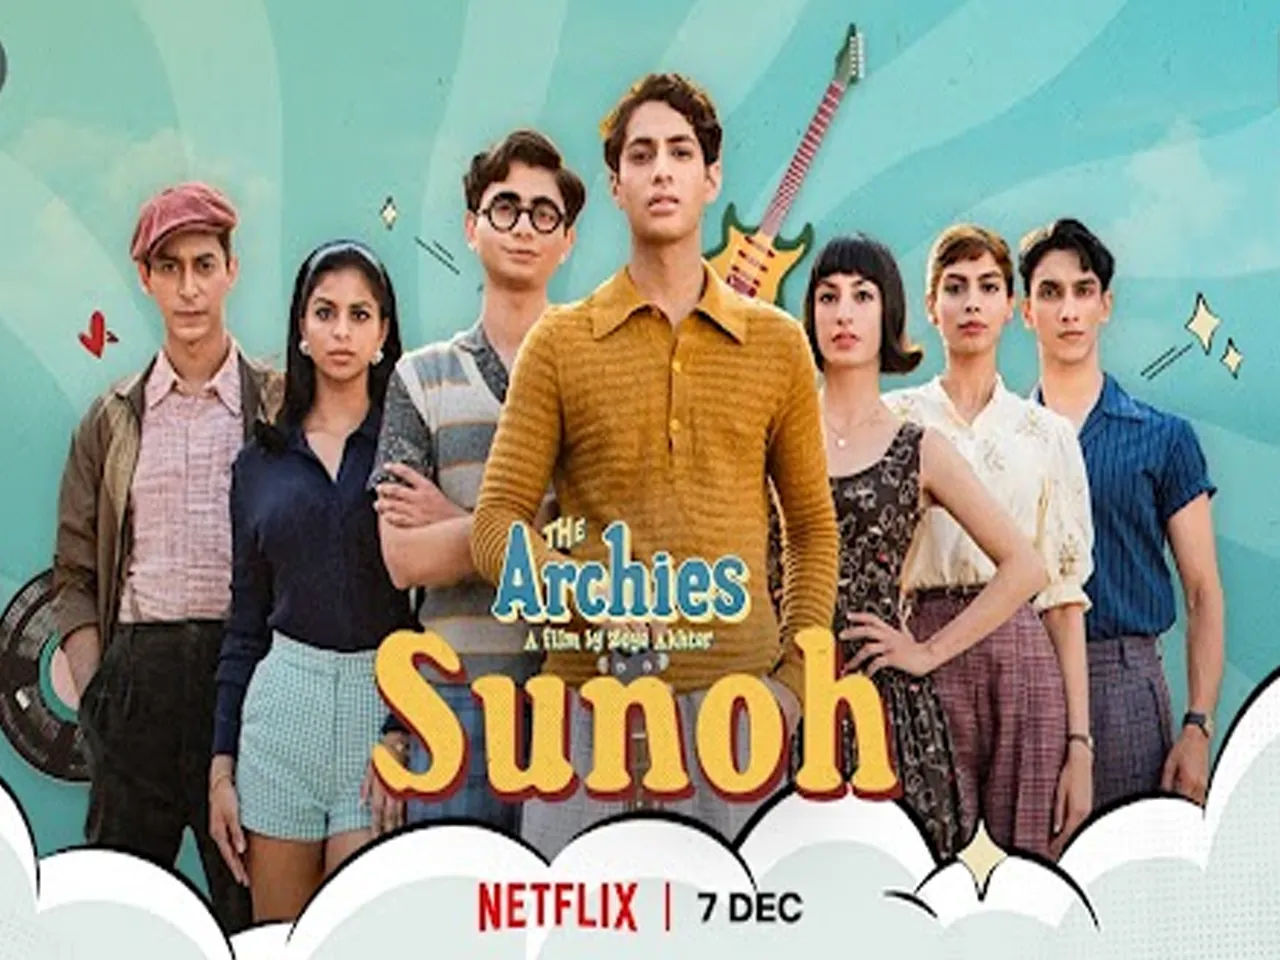 Sunoh: The Archies' debut song takes audiences on a timeless rock and roll journey